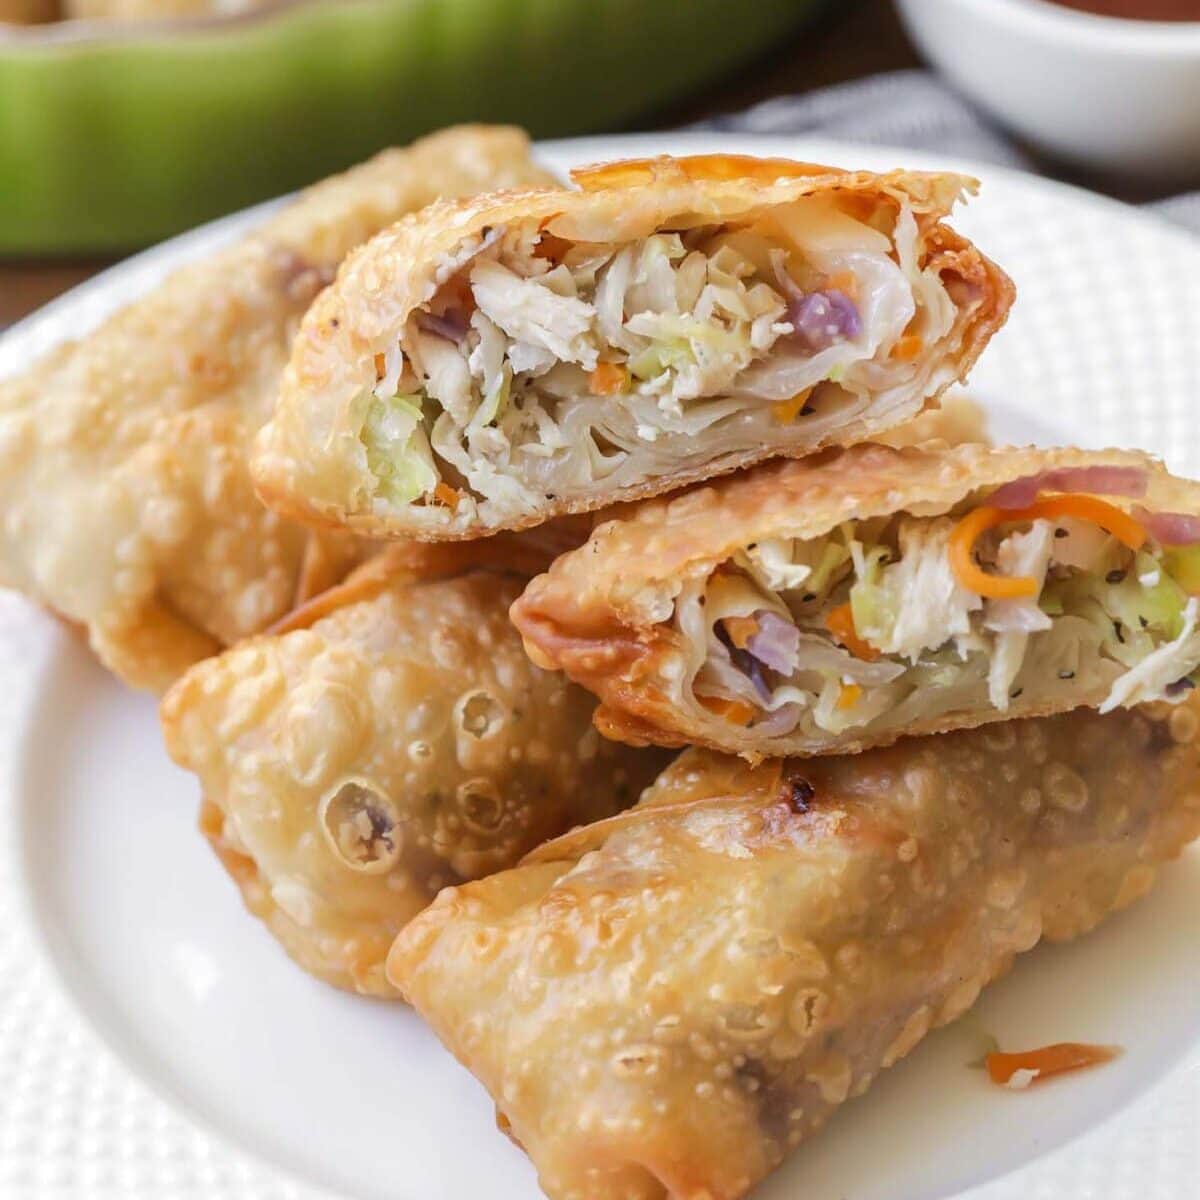 This egg roll recipe cut in half and stacked on a white plate.